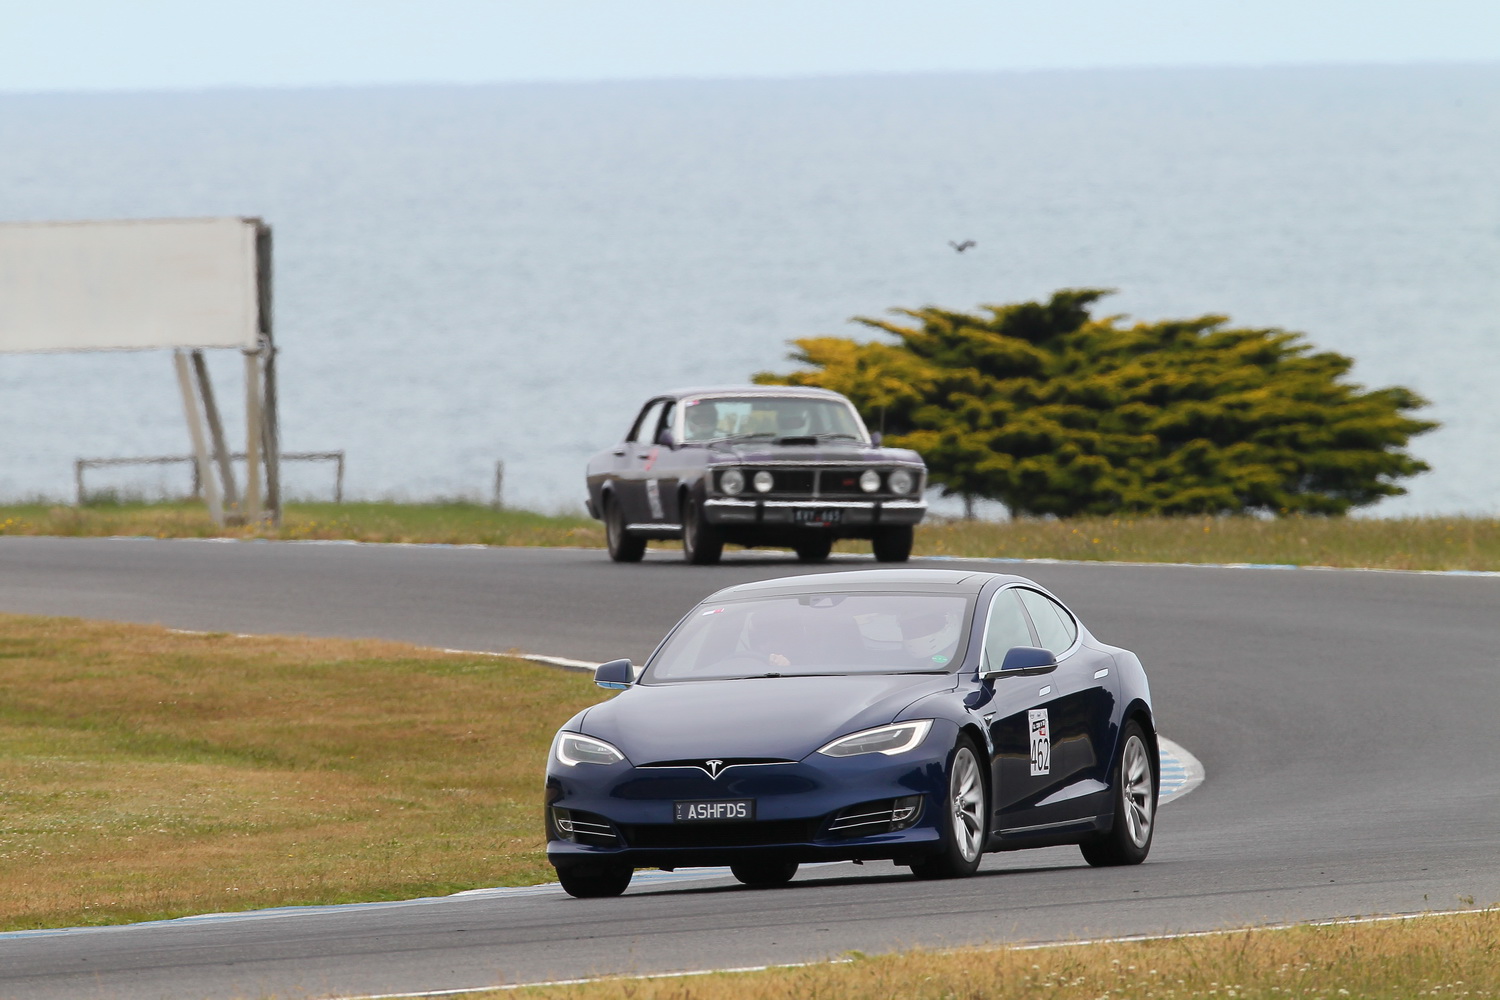 What effect does electric-vehicle regen braking have when you’re hotlapping on a racetrack?